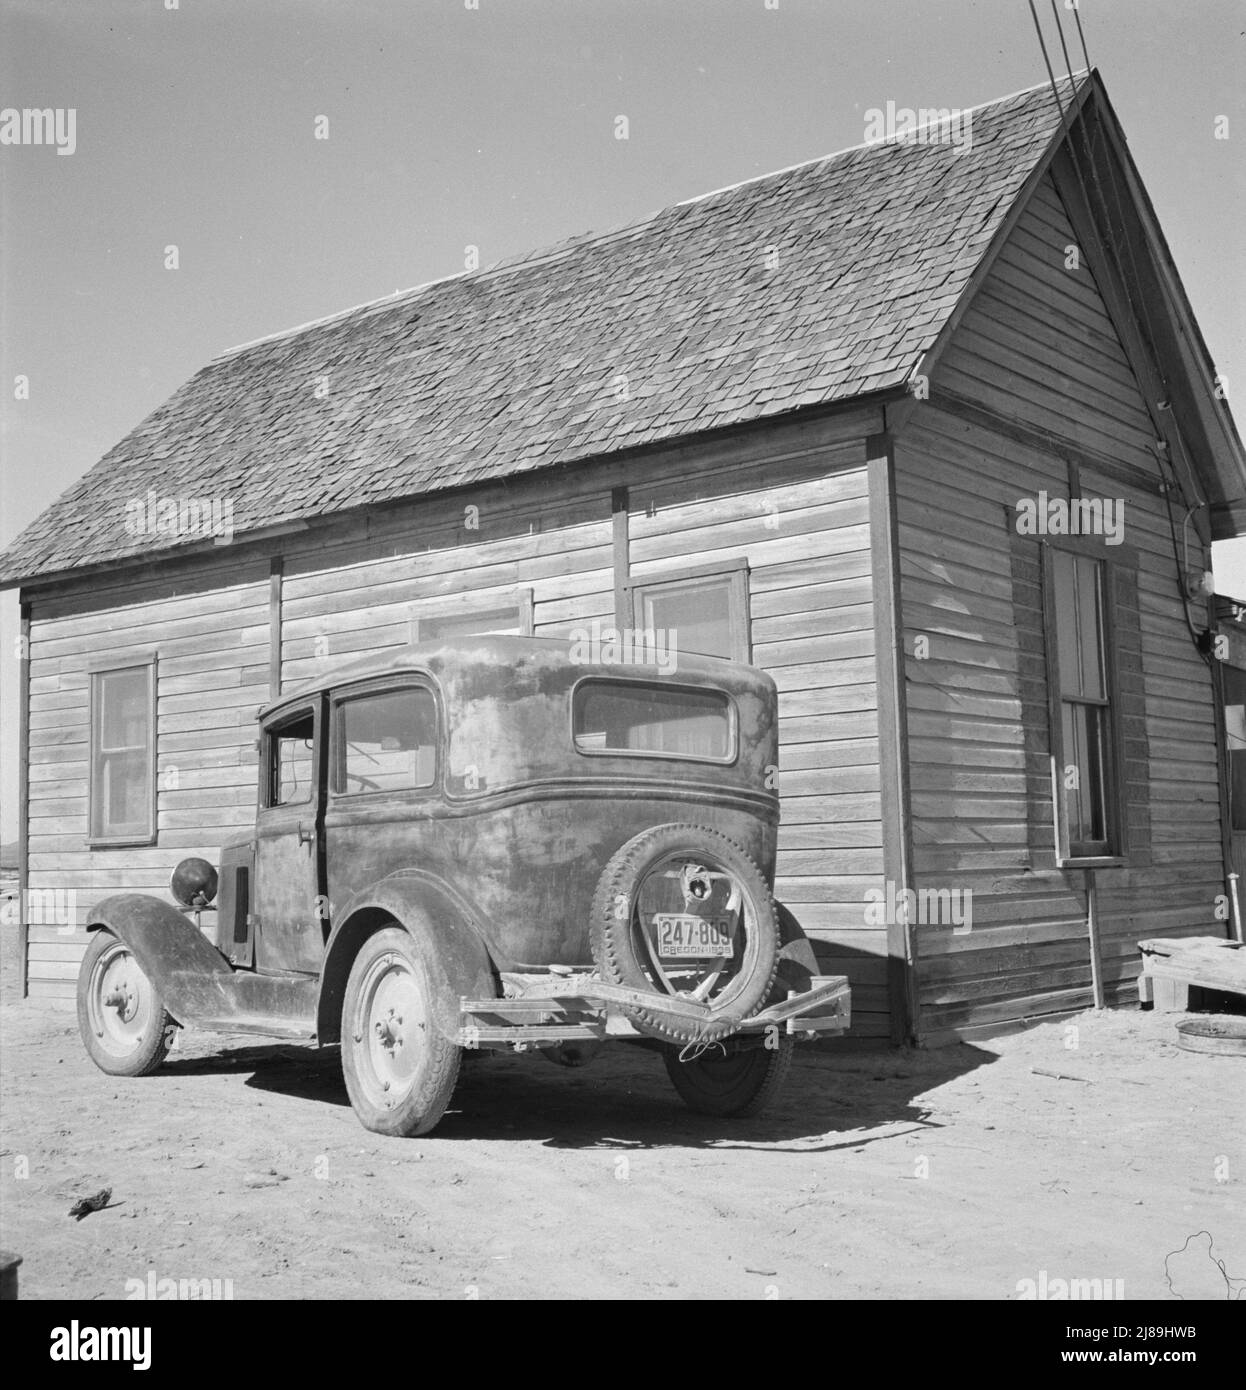 New home of Schroeder family. They left South Dakota three years ago in this car. Dead Ox Flat, Malheur County, Oregon. Stock Photo